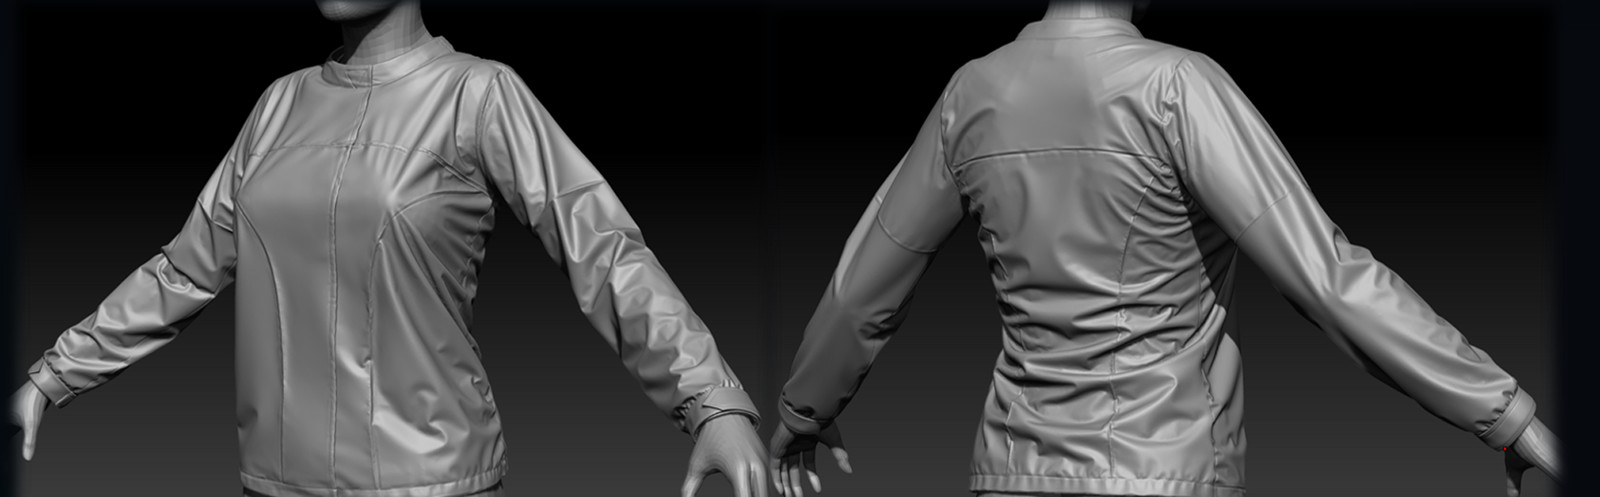 Being accurate on negative space improves cloth's realism.